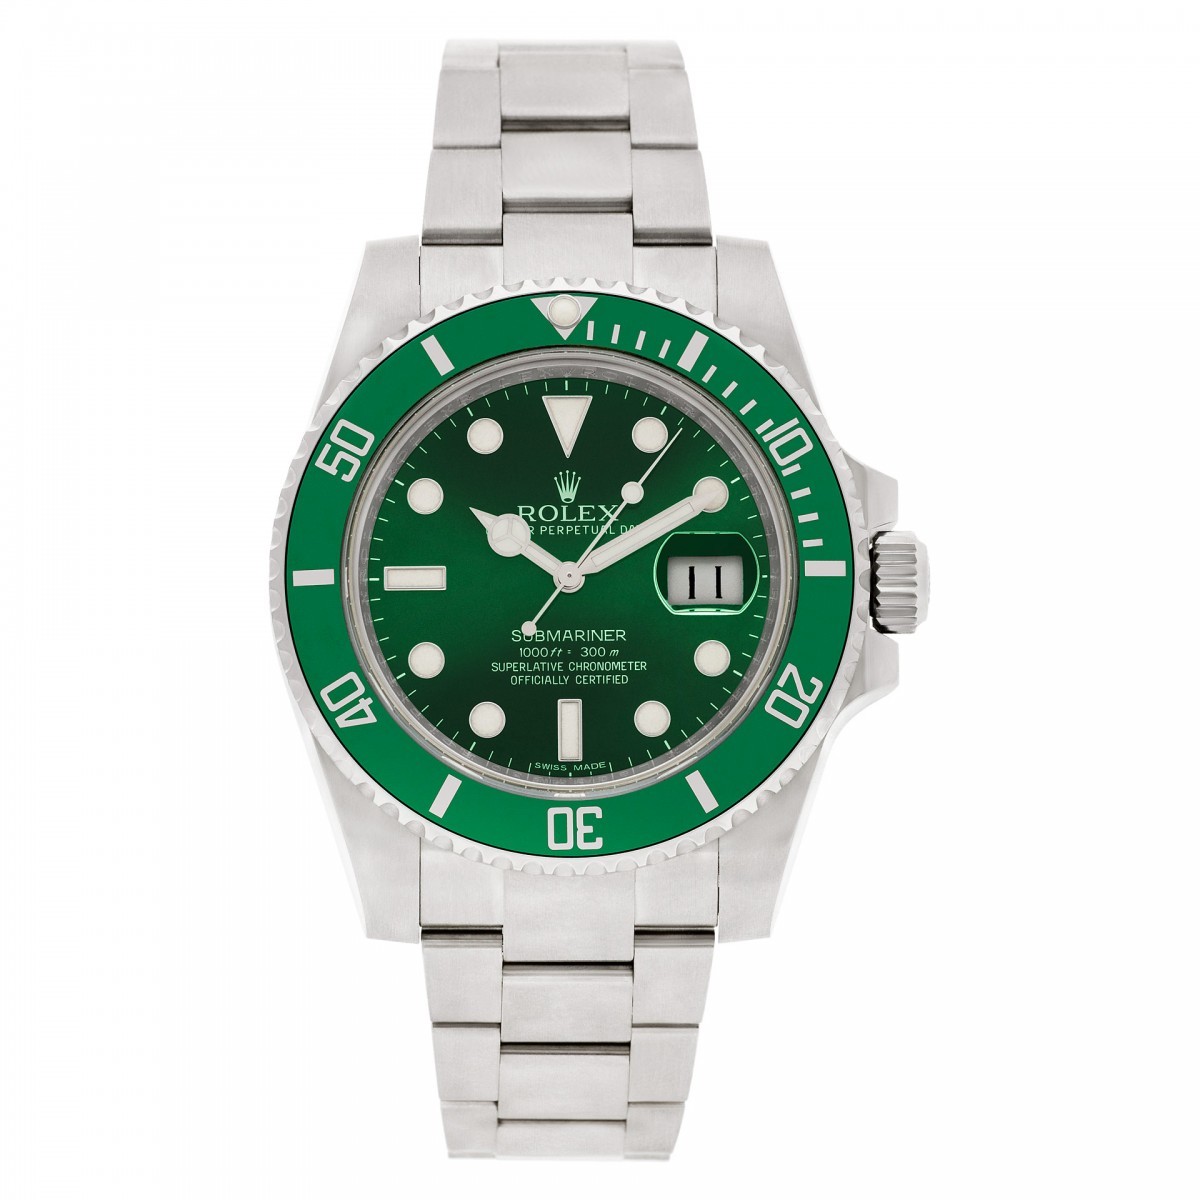 buying rolex from stockx